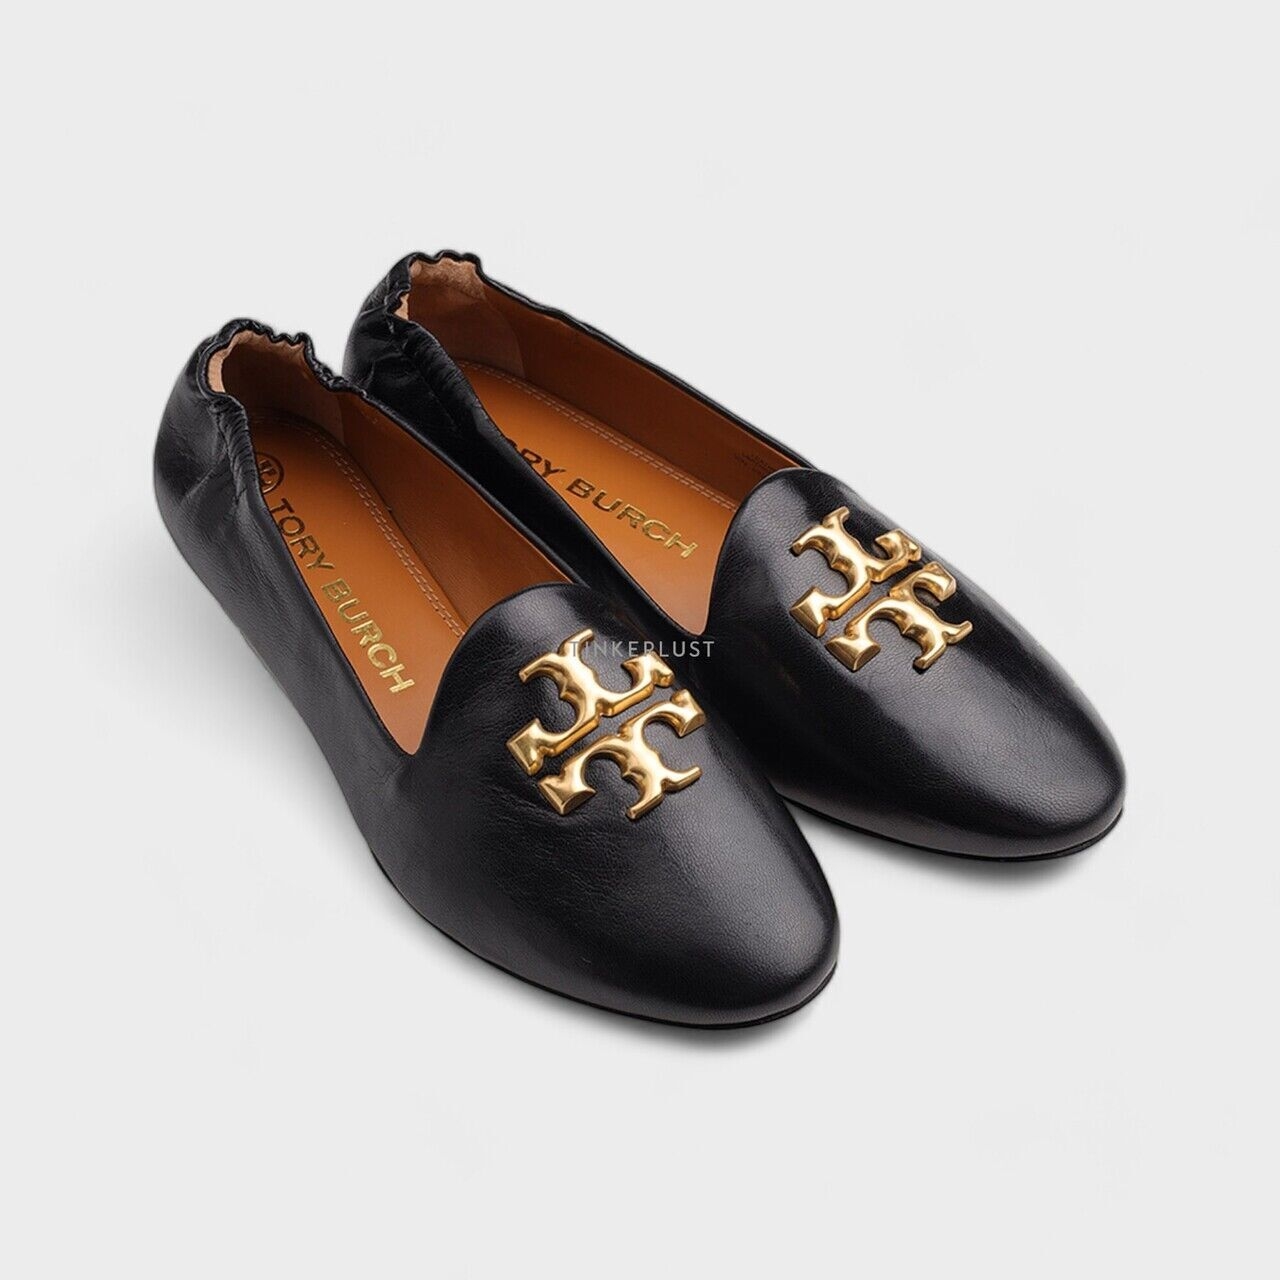 Tory Burch Eleanor Loafers in Perfect Black Flats